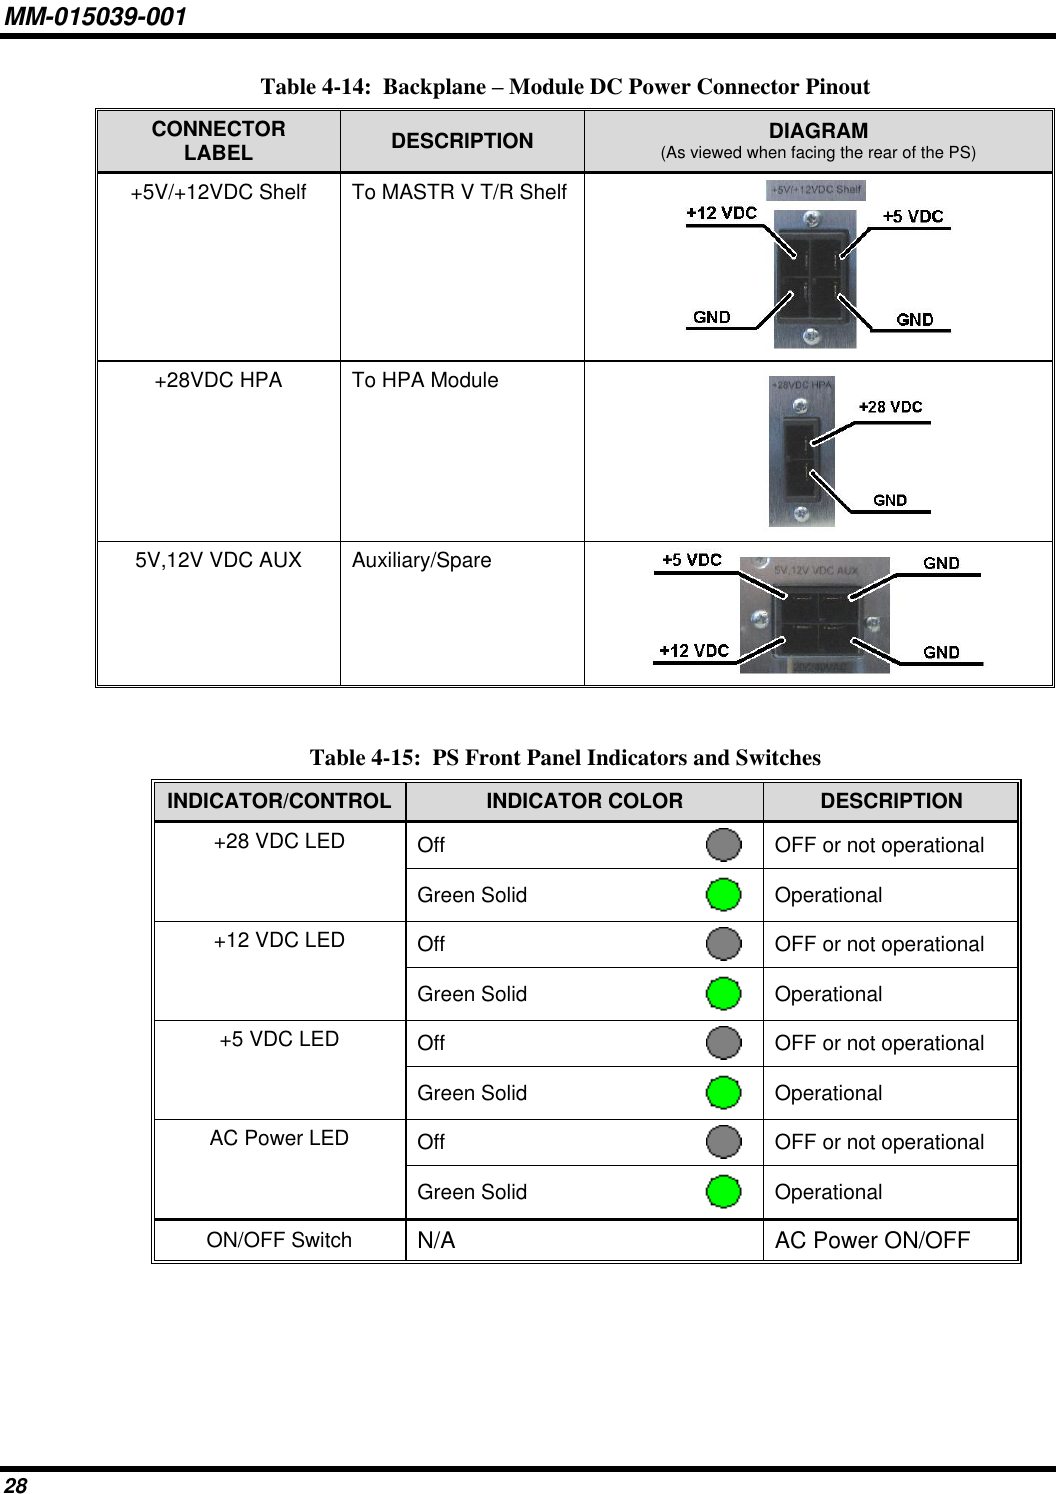 MM-015039-001 28 Table 4-14:  Backplane – Module DC Power Connector Pinout CONNECTOR LABEL DESCRIPTION DIAGRAM (As viewed when facing the rear of the PS) +5V/+12VDC Shelf To MASTR V T/R Shelf  +28VDC HPA To HPA Module                                5V,12V VDC AUX Auxiliary/Spare    Table 4-15:  PS Front Panel Indicators and Switches INDICATOR/CONTROL INDICATOR COLOR DESCRIPTION +28 VDC LED Off  OFF or not operational Green Solid  Operational +12 VDC LED Off  OFF or not operational Green Solid  Operational +5 VDC LED Off  OFF or not operational Green Solid  Operational AC Power LED Off  OFF or not operational Green Solid  Operational ON/OFF Switch N/A  AC Power ON/OFF  